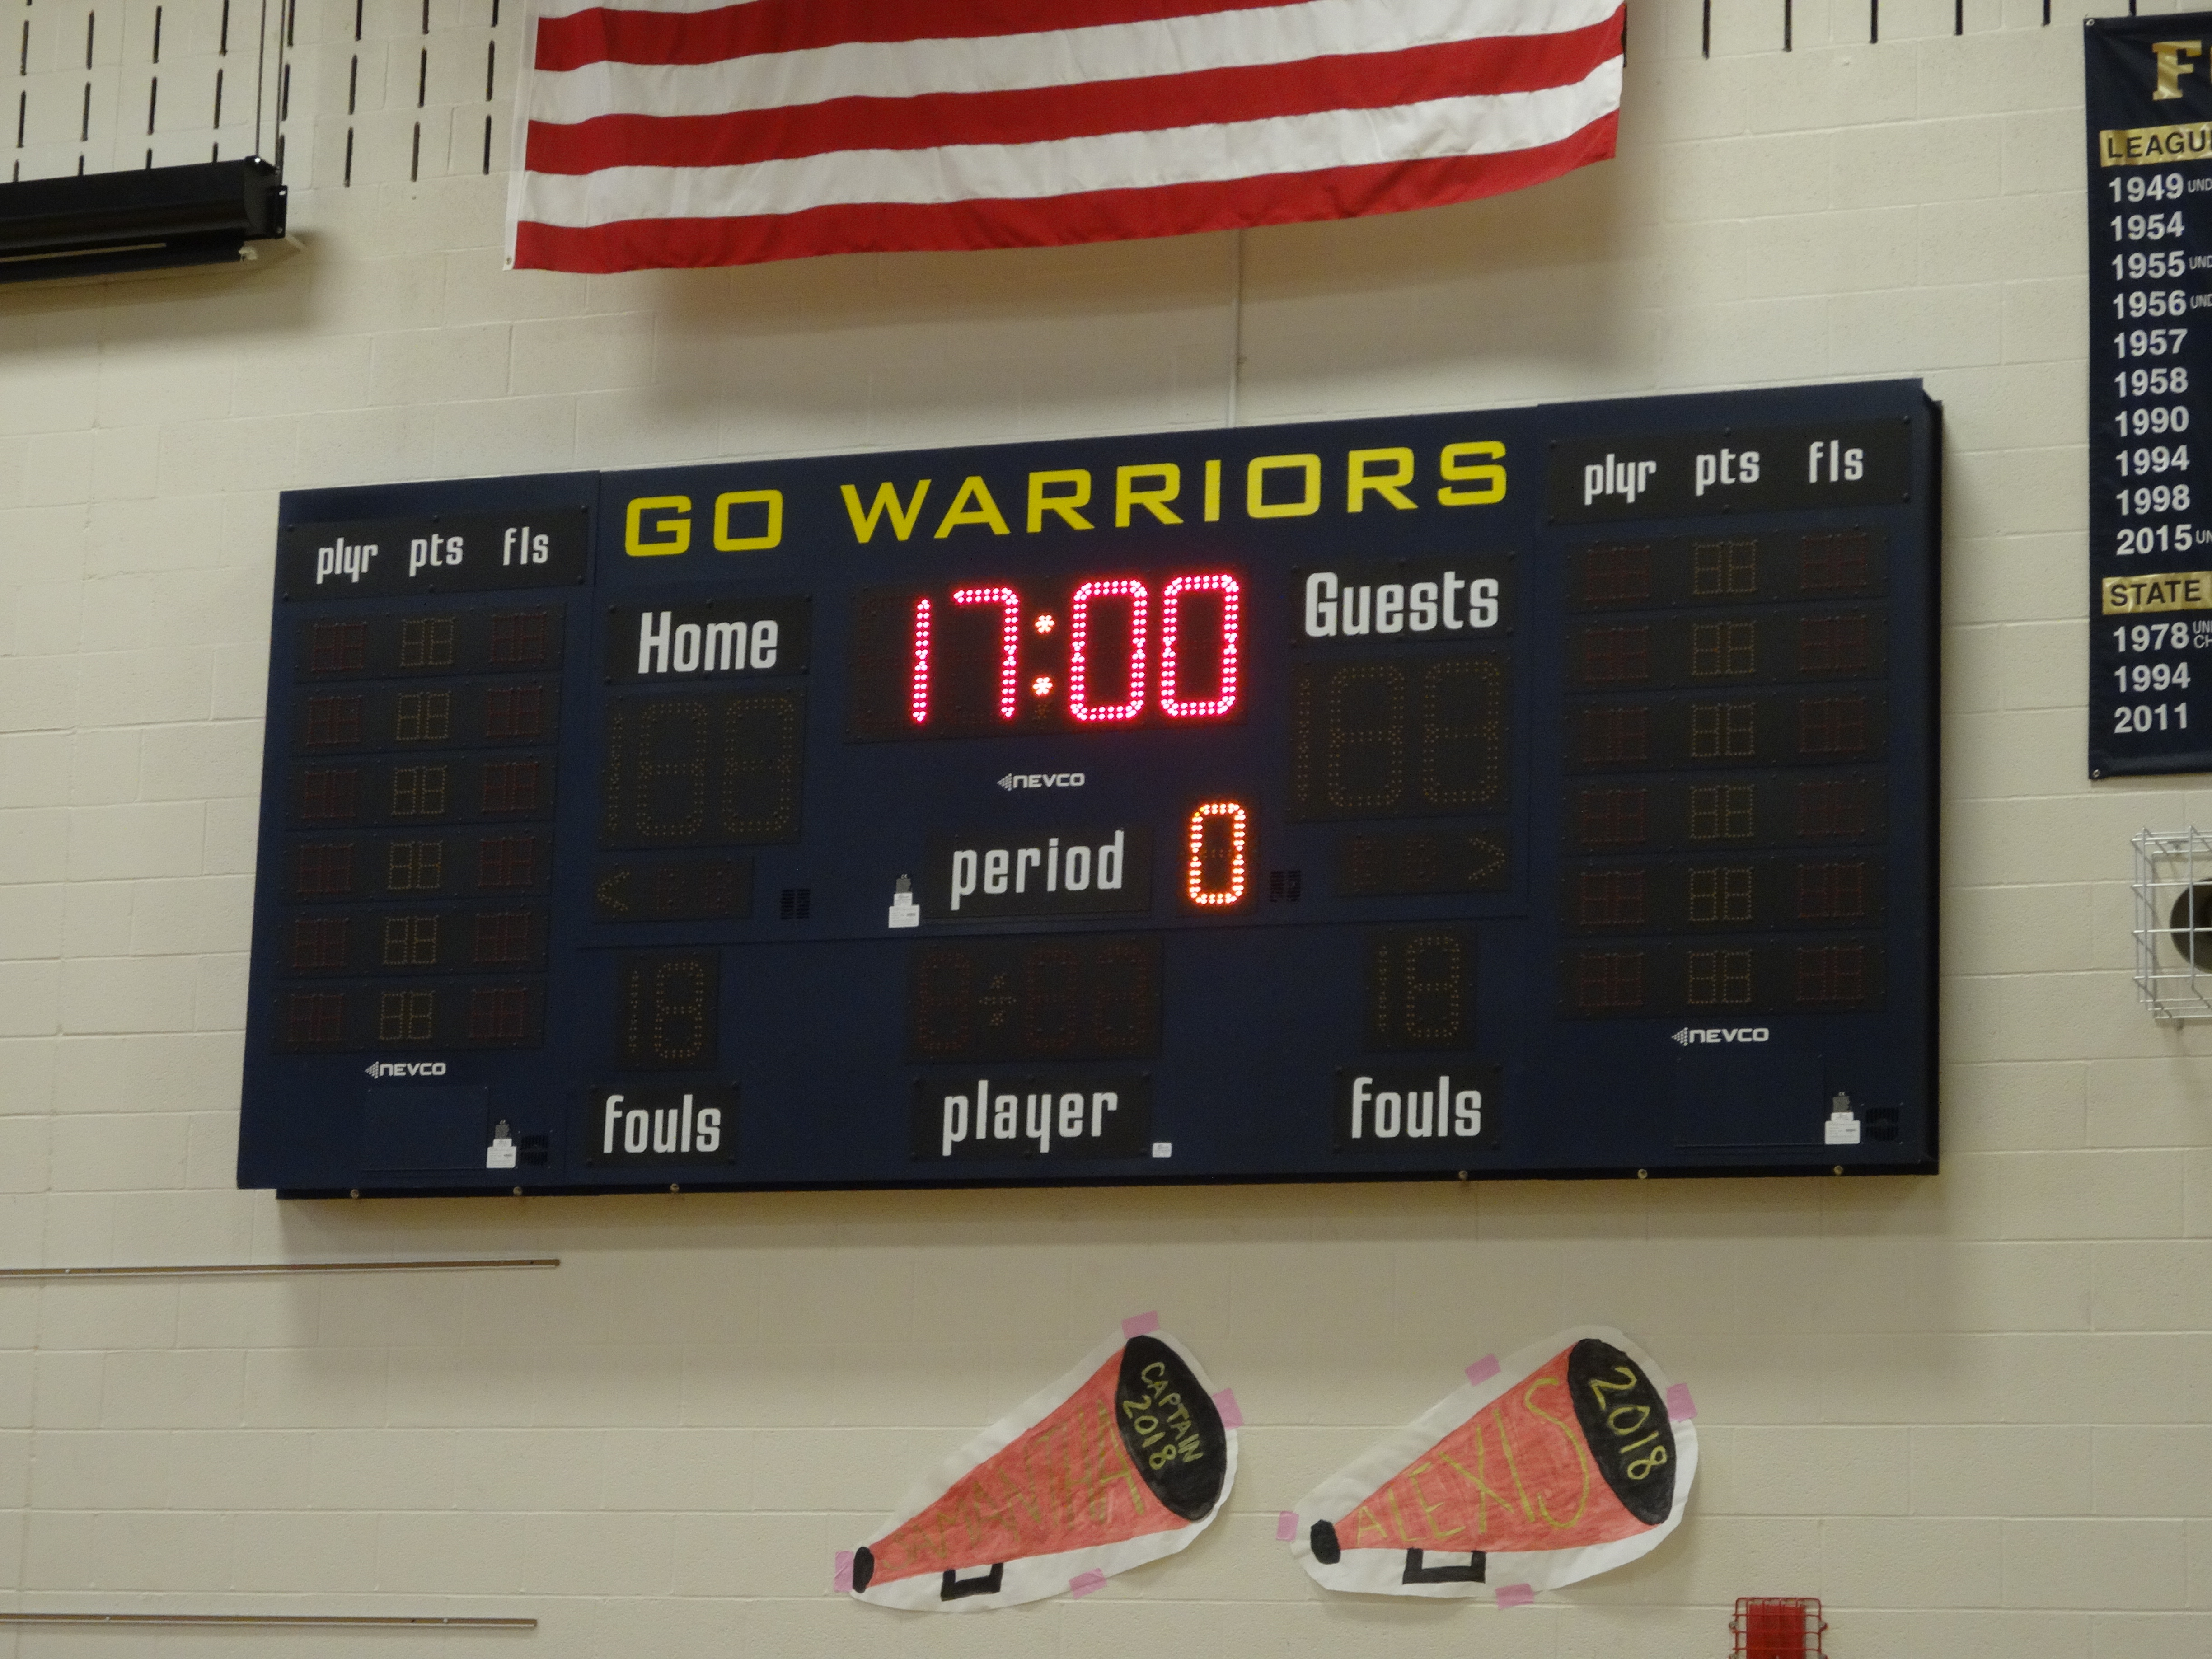 The Brookfield High School scoreboard waits to countdown the time for National Walkout Day. The 17 minutes represents one minute for each person killed in the Parkland, Fla., school shooting.